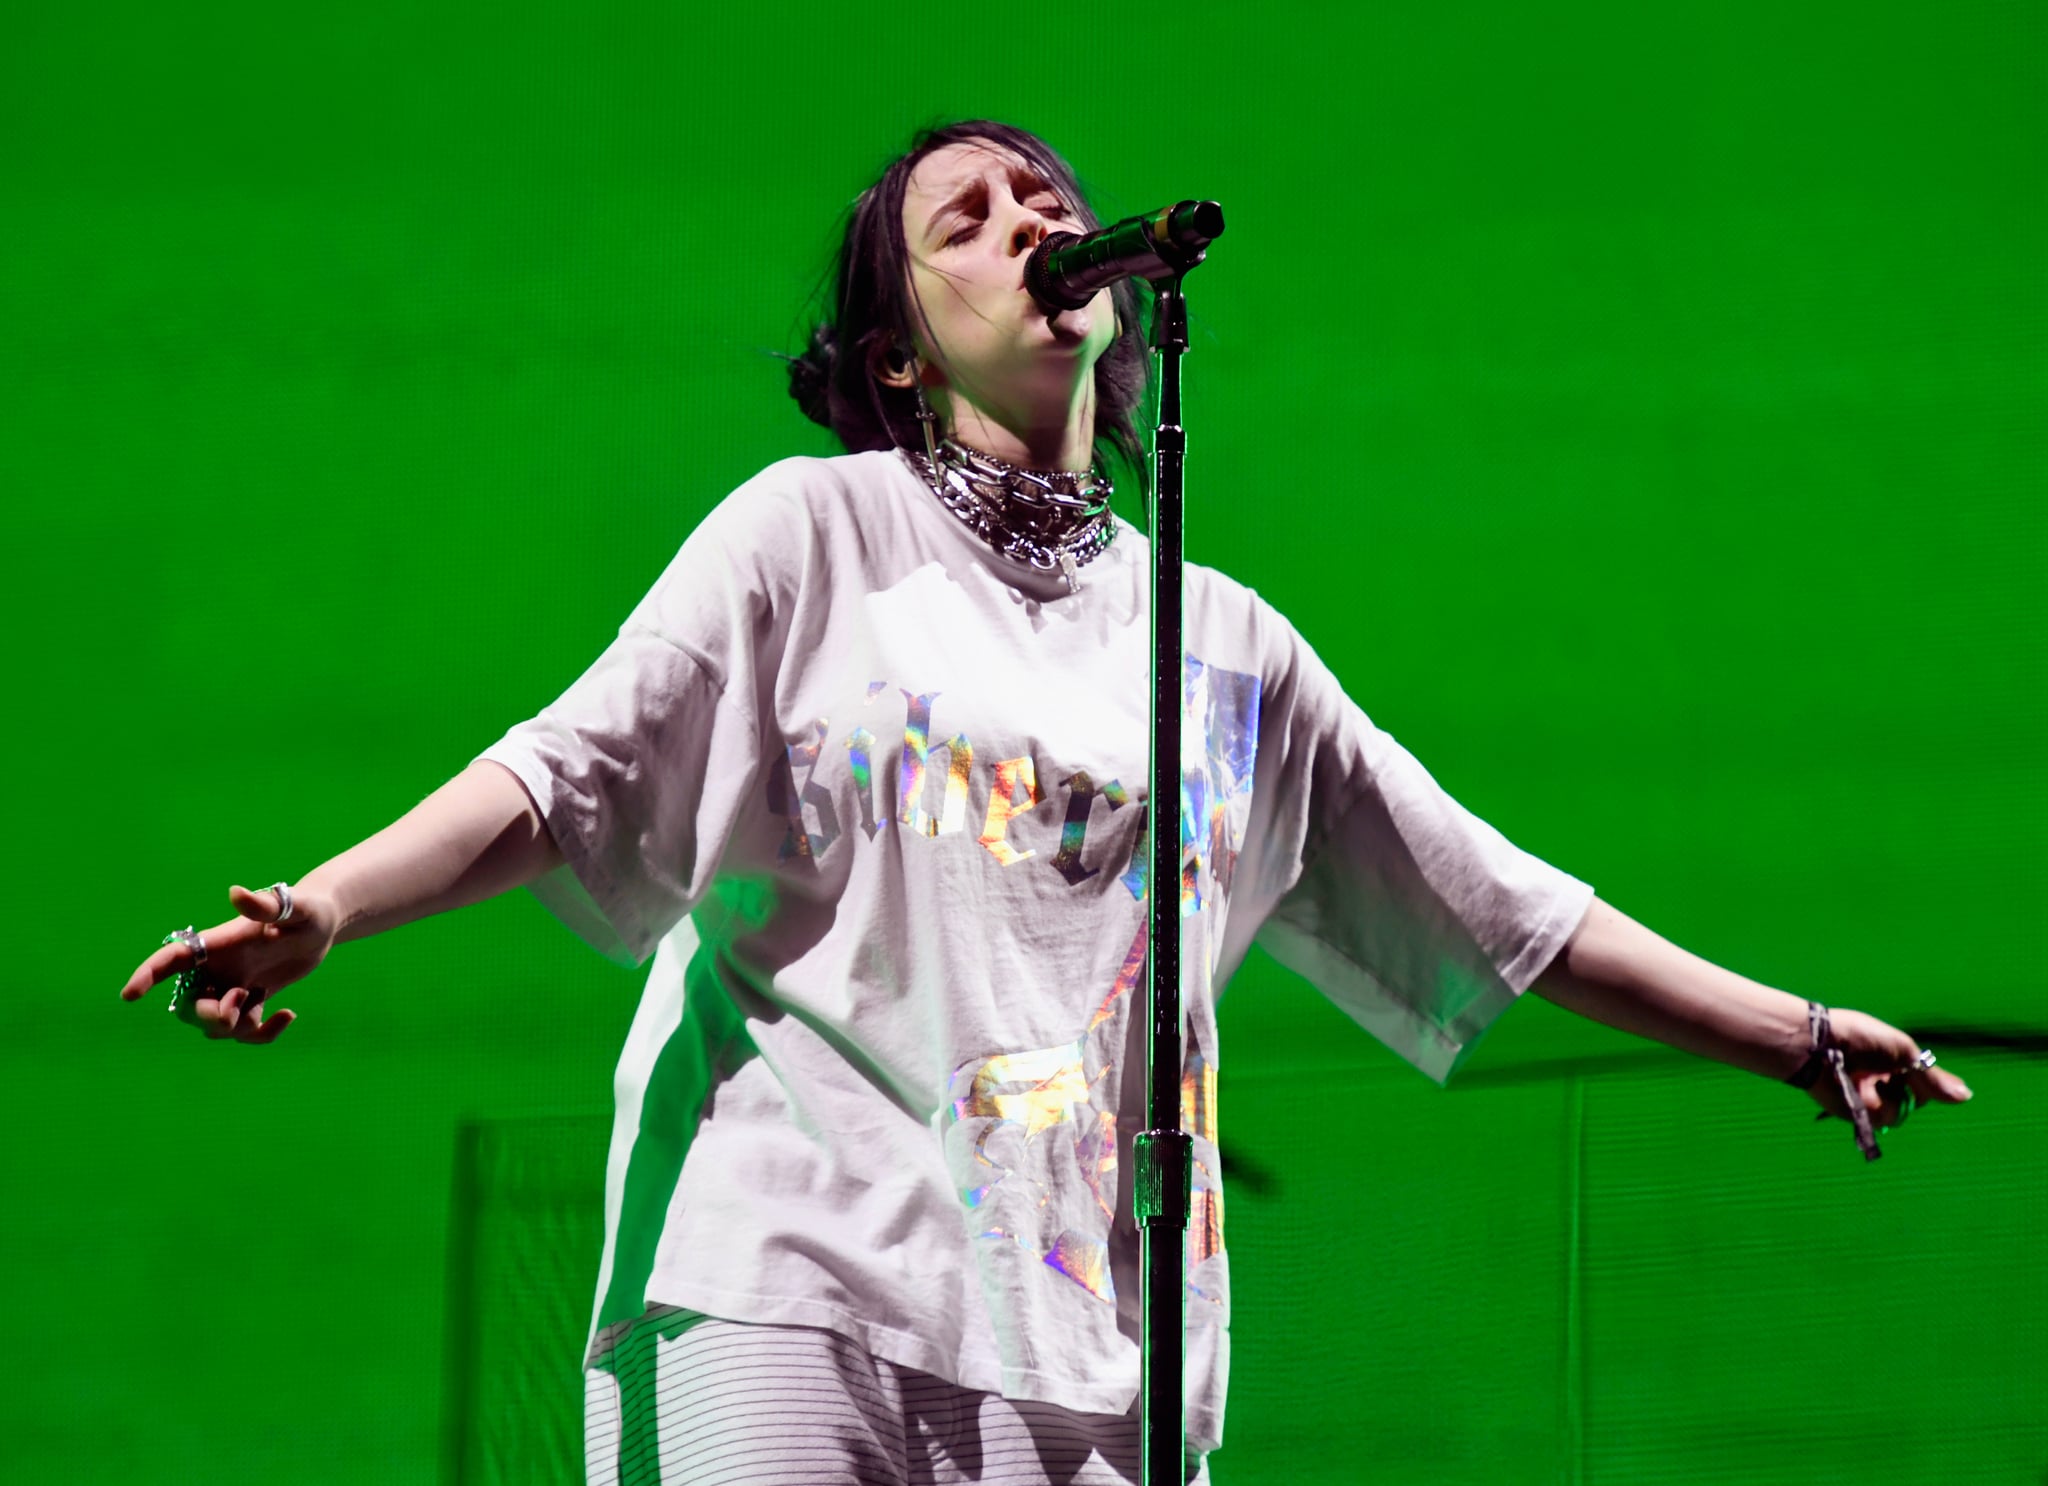 INDIO, CA - APRIL 13:  Billie Eilish performs at Outdoor Theatre during the 2019 Coachella Valley Music And Arts Festival on April 13, 2019 in Indio, California.  (Photo by Frazer Harrison/Getty Images for Coachella)